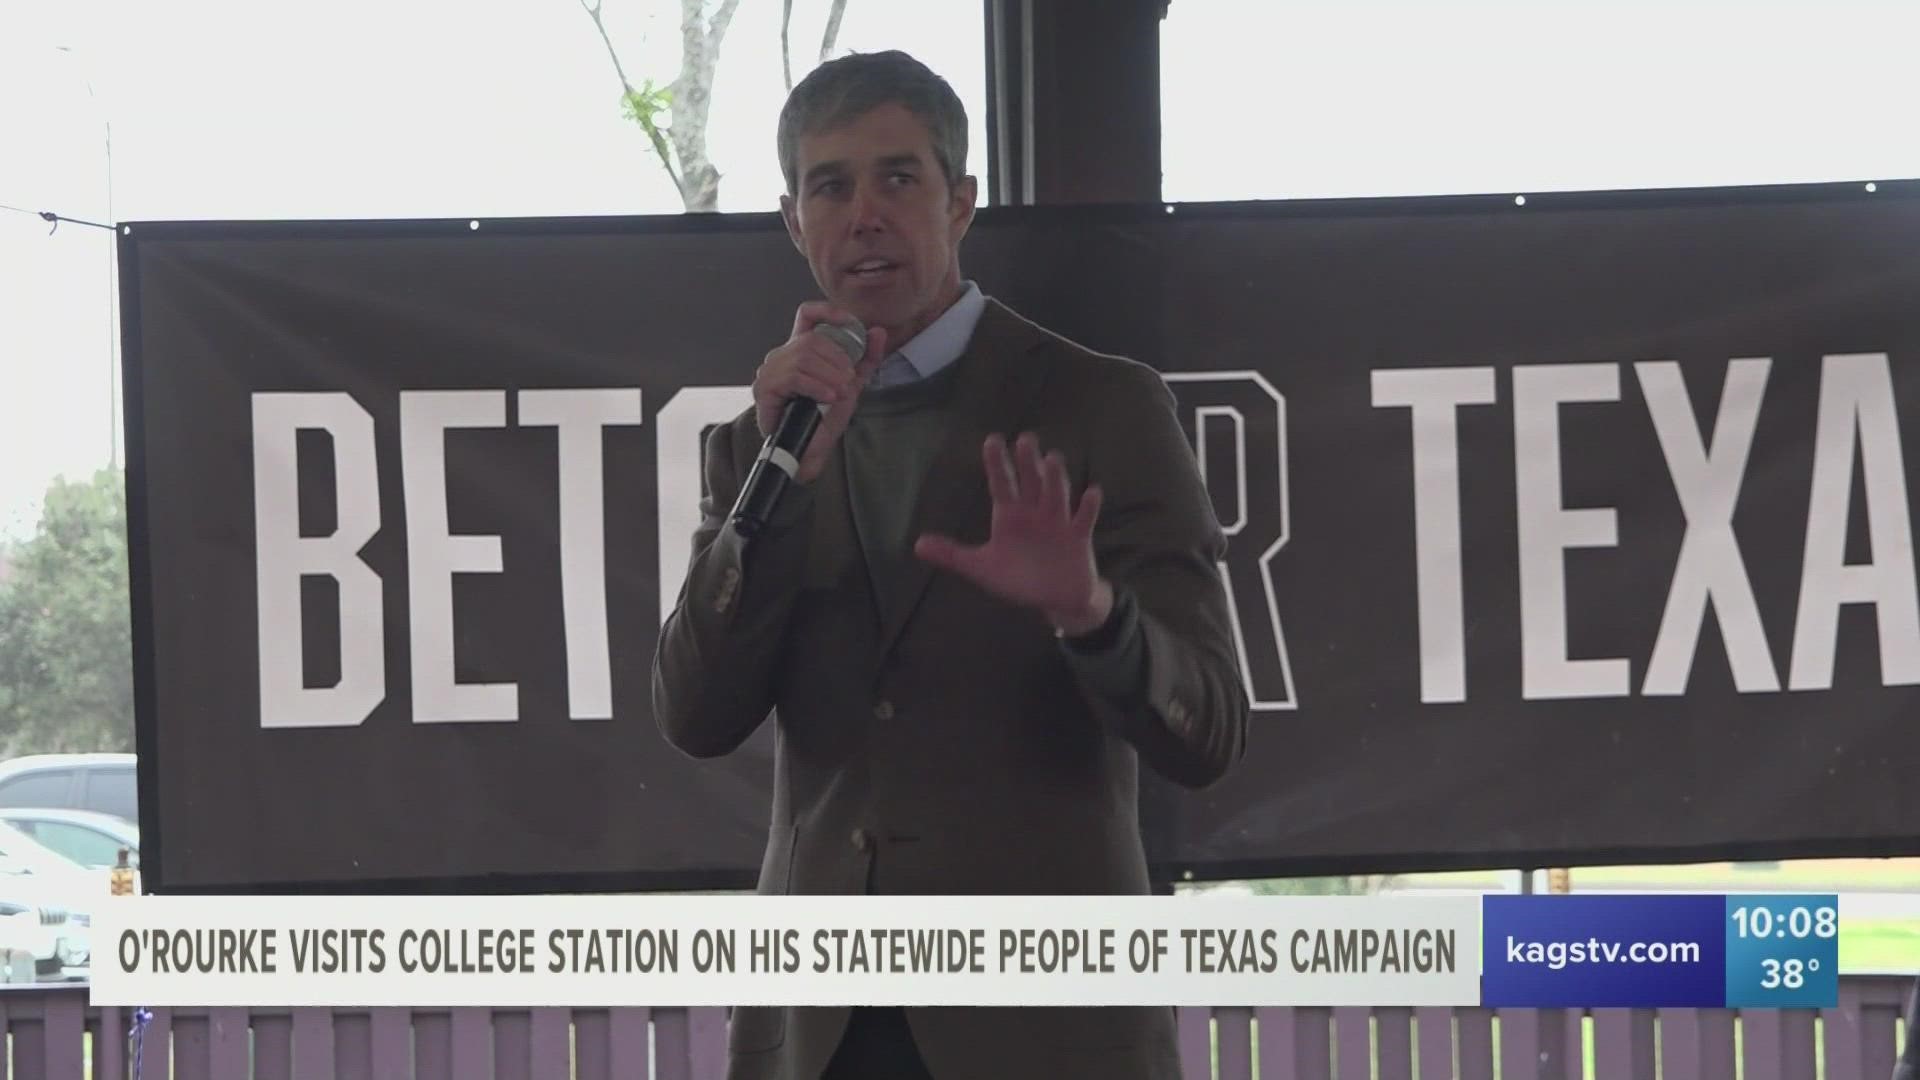 O'Rourke visited College Station as part of his Statewide People of Texas Campaign.